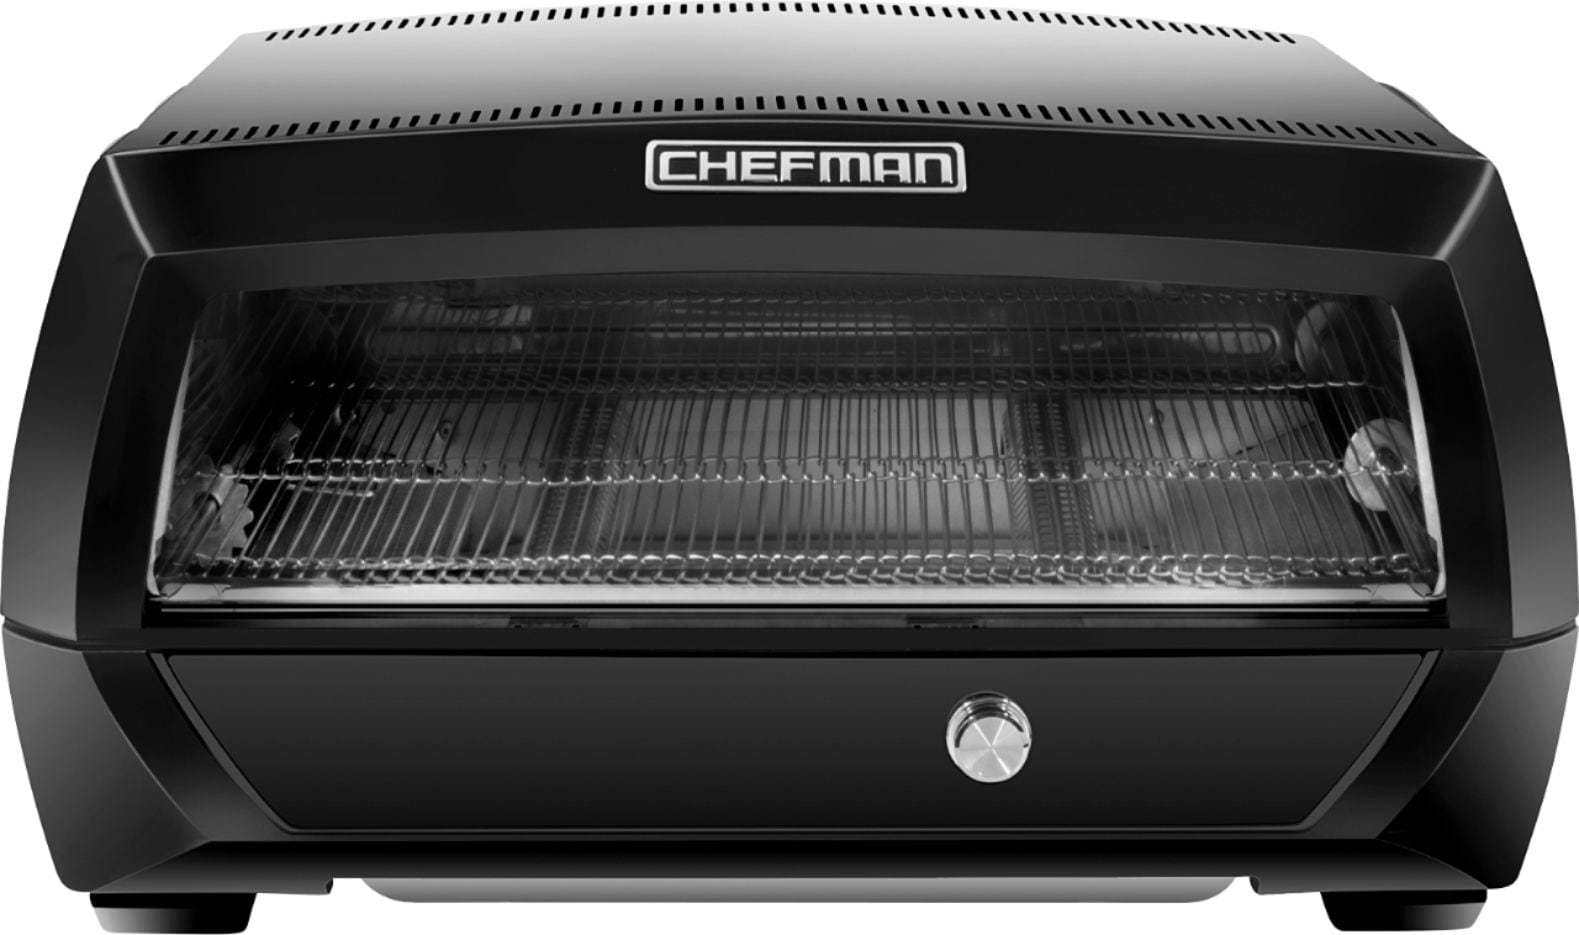 Chefman Food Mover Conveyor Toaster Oven, Stainles